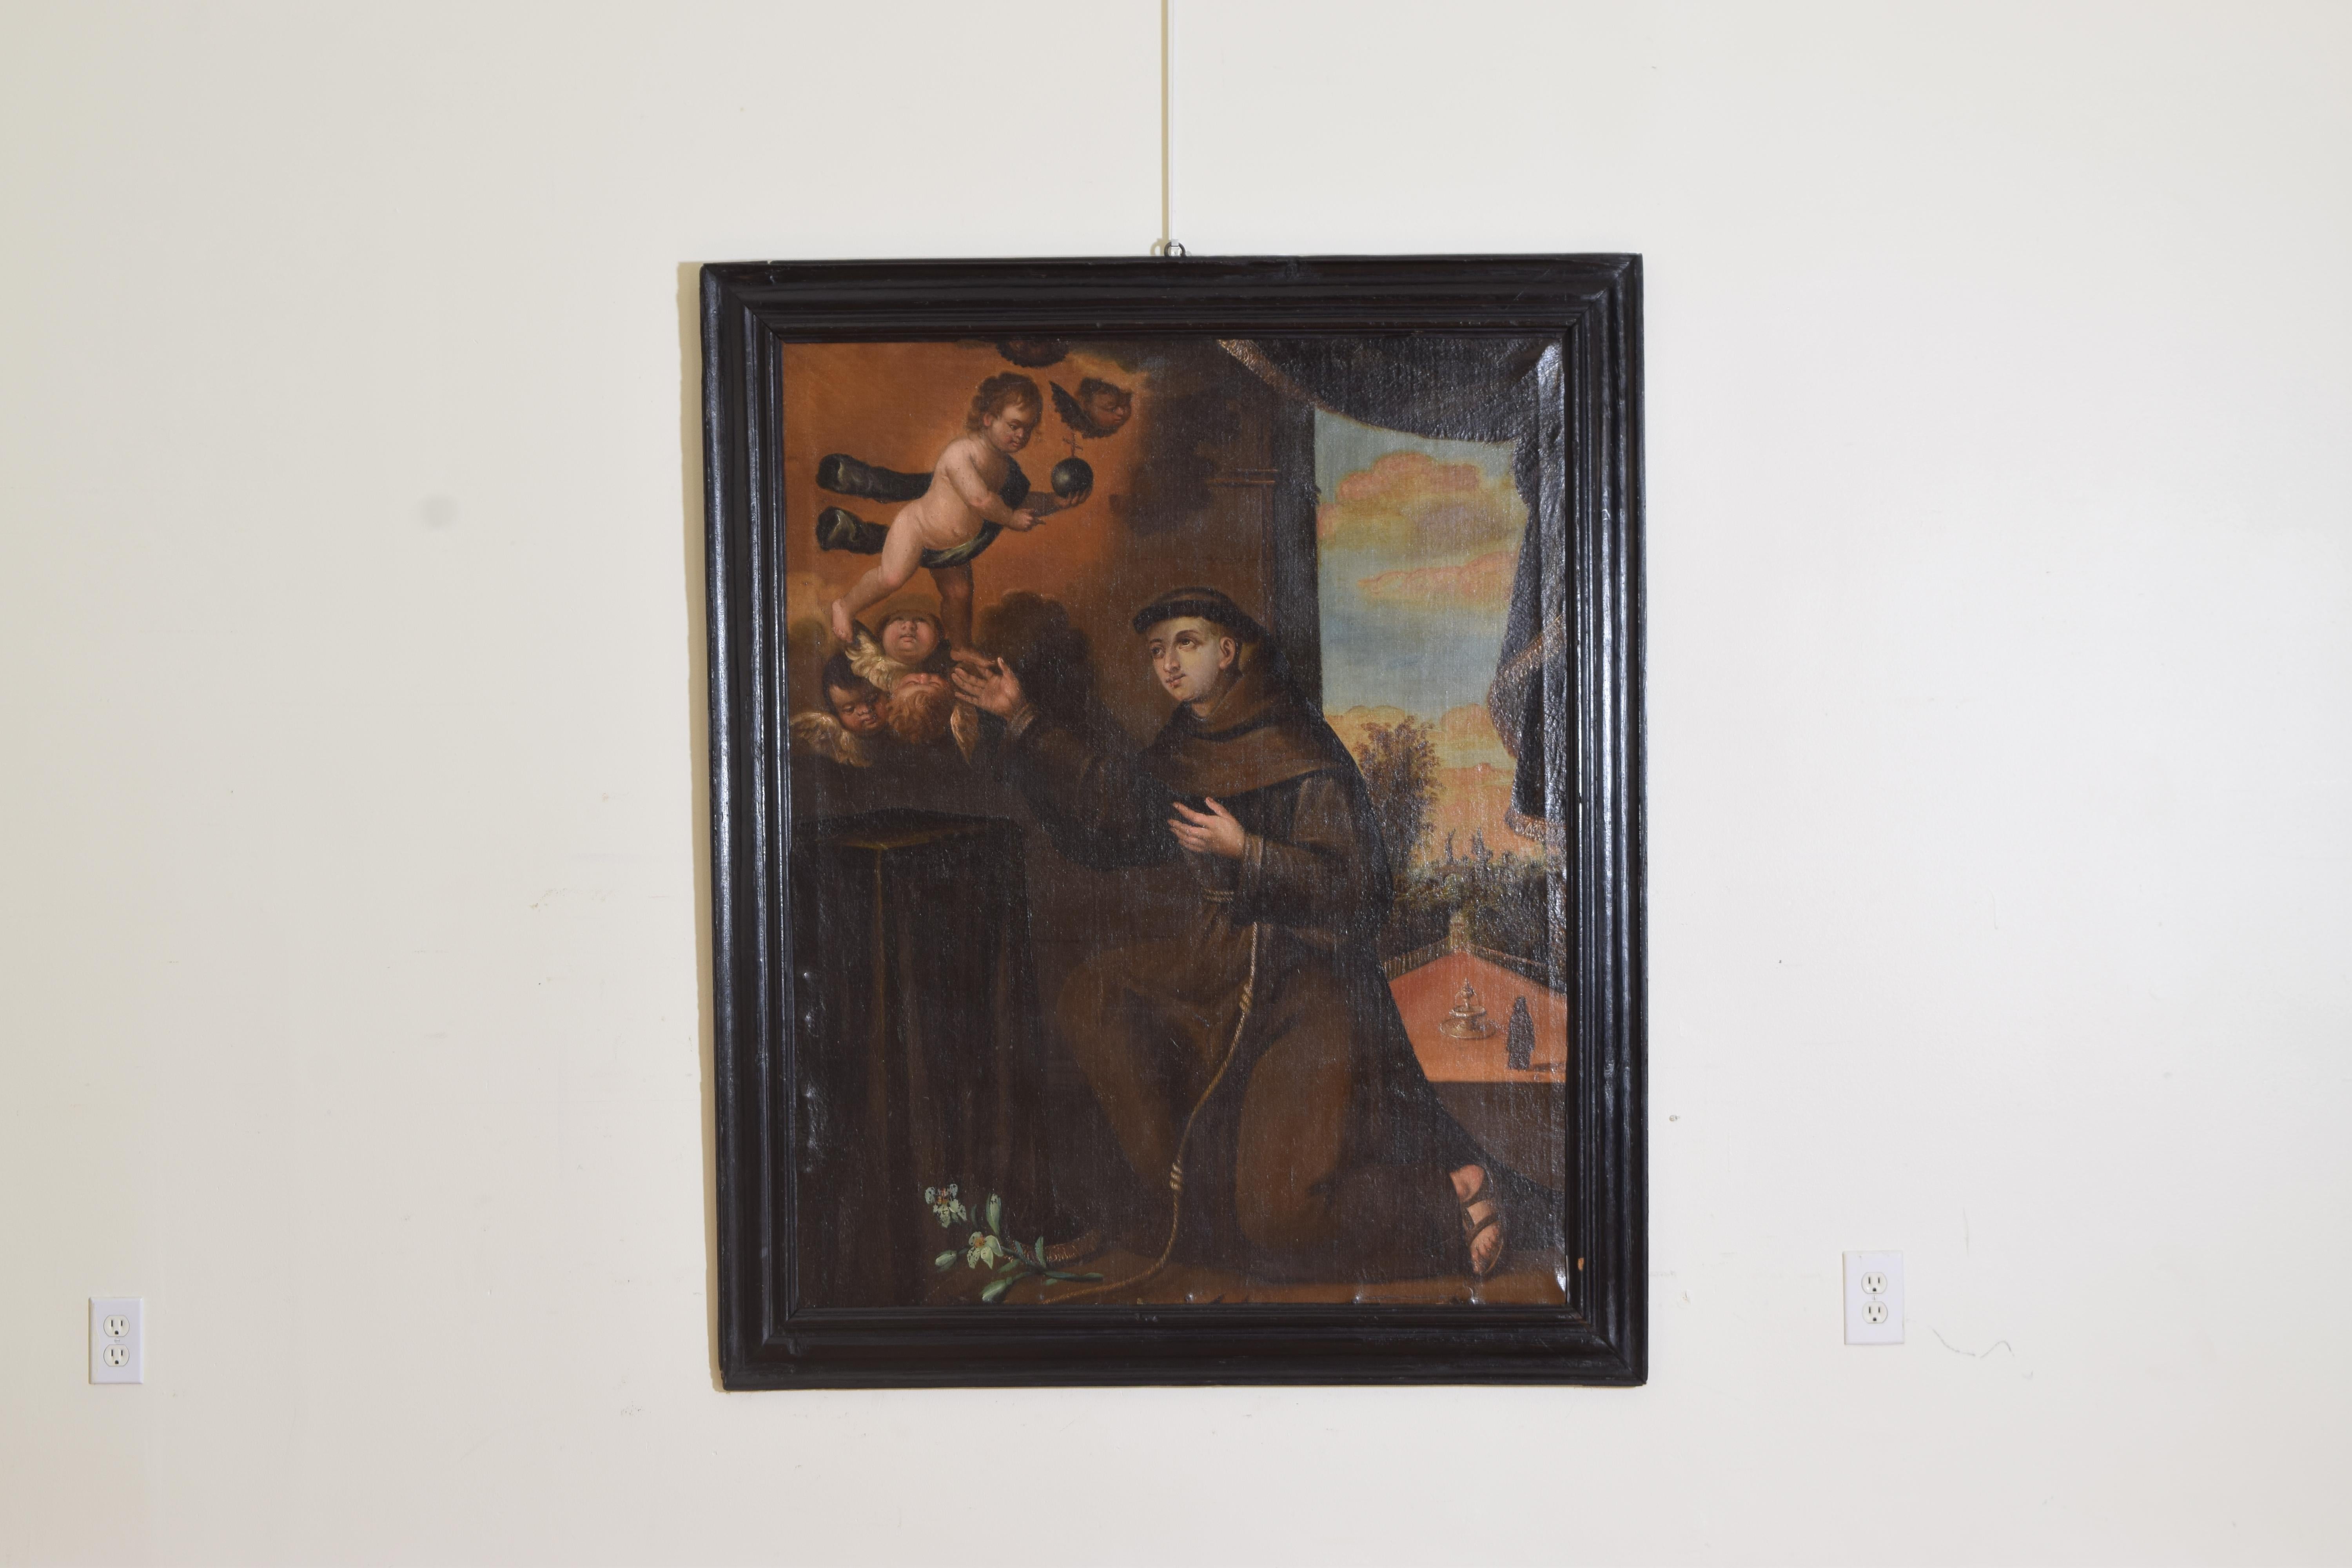 Oil on canvas depicting Saint Anthony in a garden being visited by Angelic Cherubs with a courtyard and fountain and mysterious figure in the background, the ever present Lily flower in the foreground. In a period ebonized wood frame. 

Anthony of